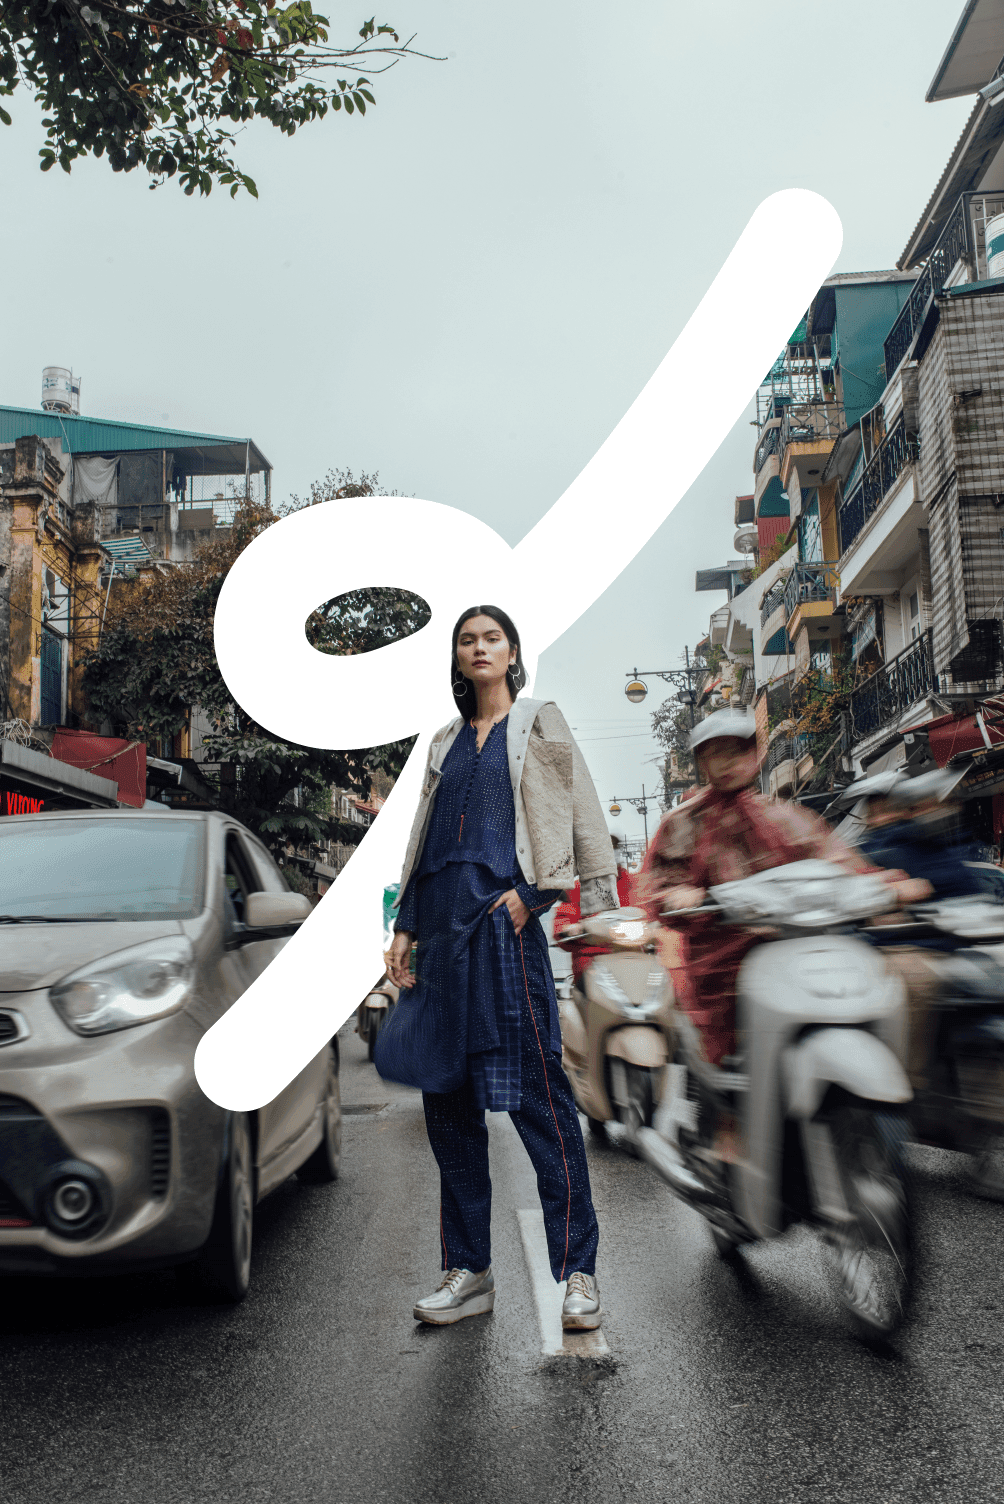 This is an image of a Vietnamese model standing in the Hanoi traffic